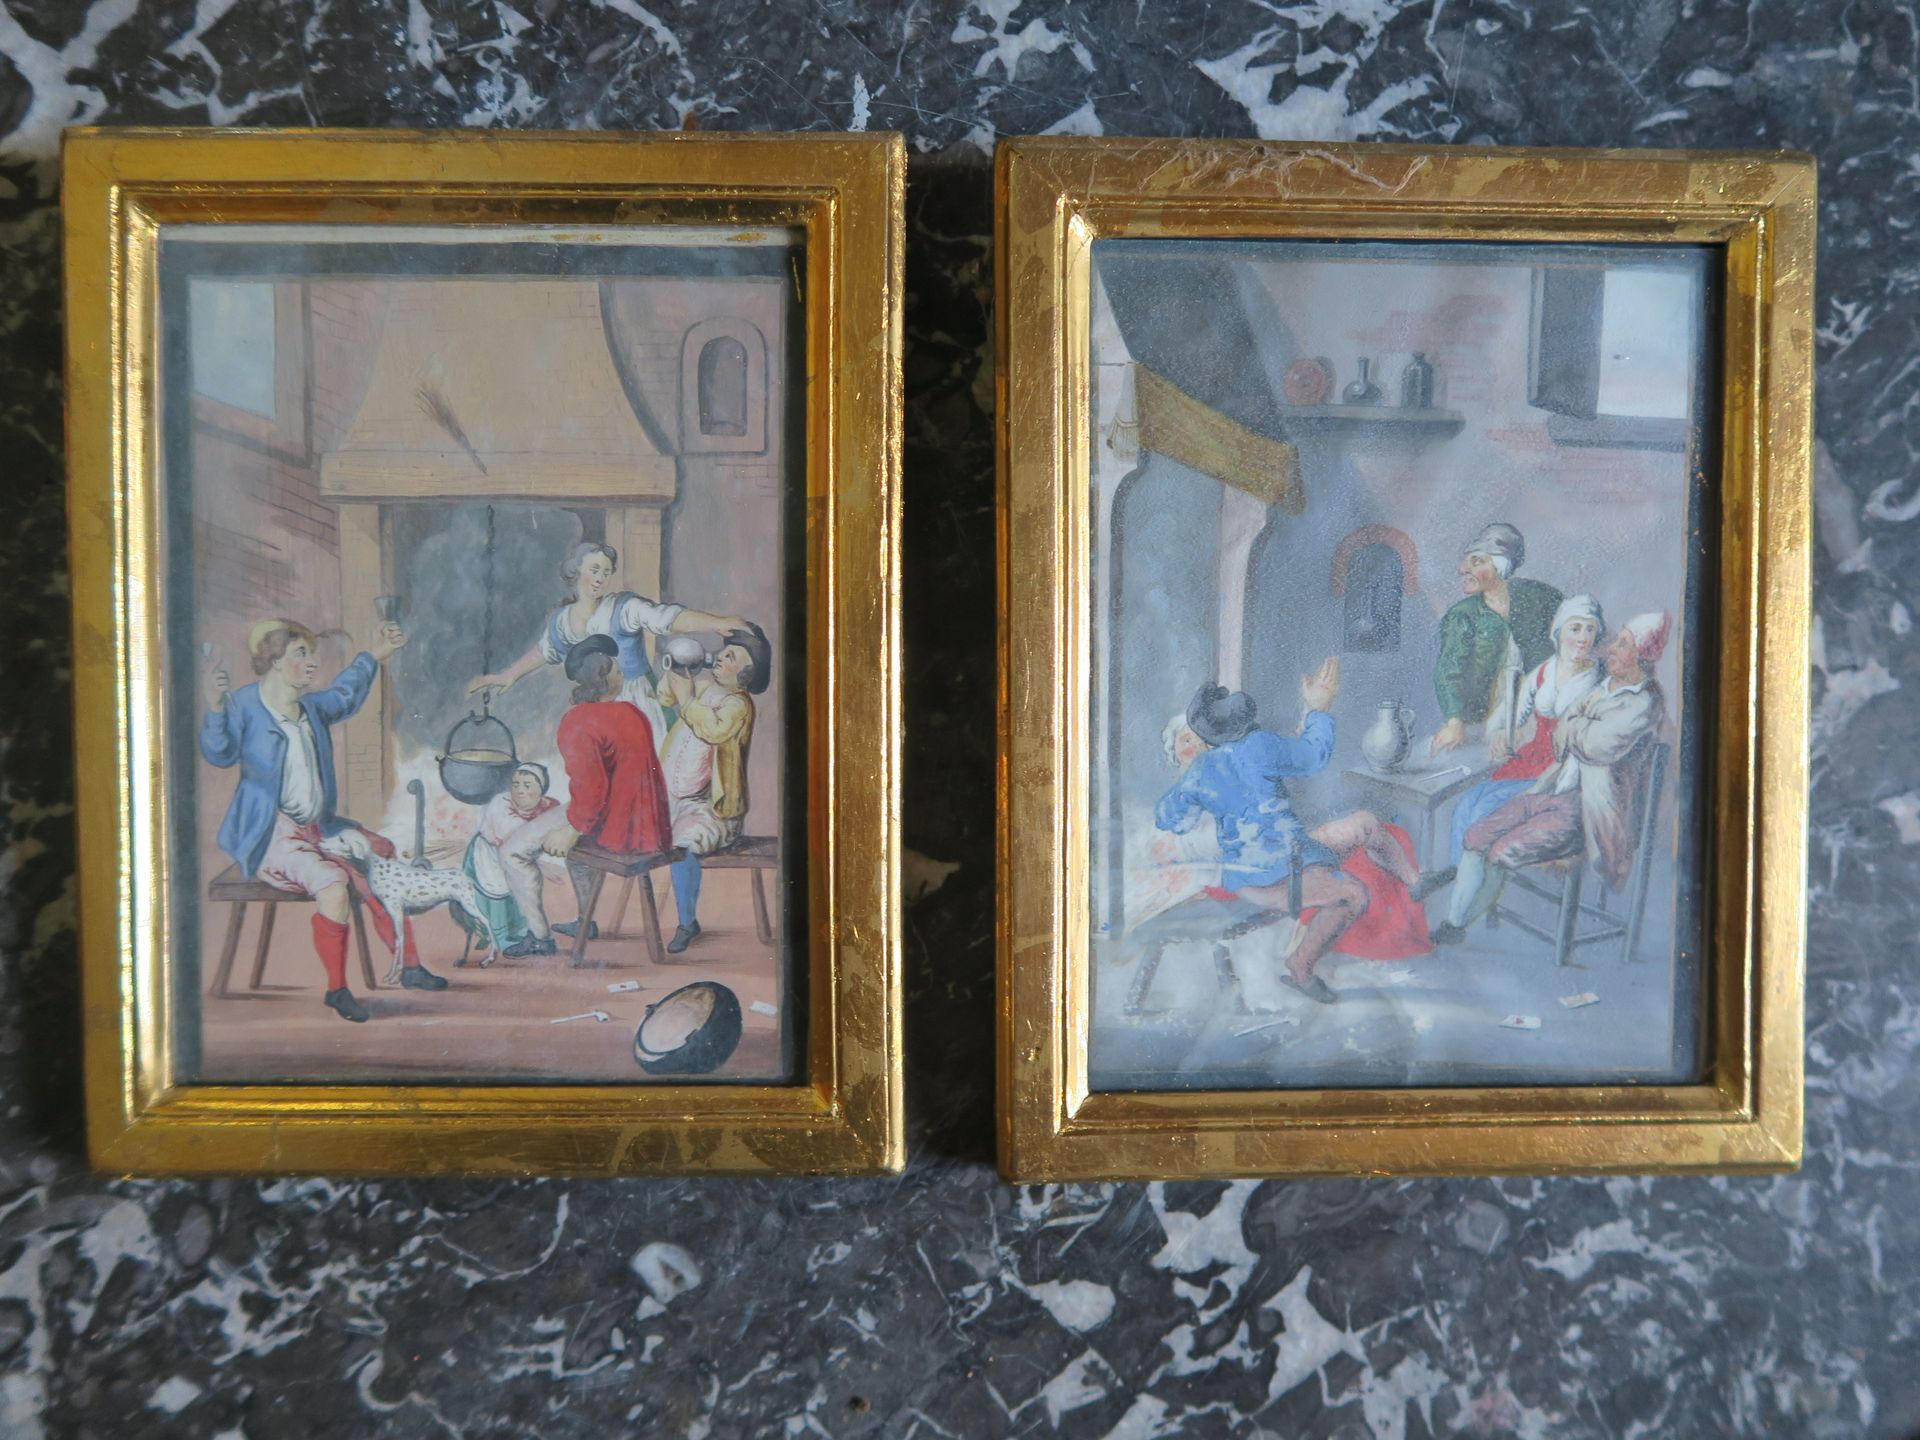 Null School of the XIXth century
Scenes of an animated tavern
Gouache on paper
H&hellip;